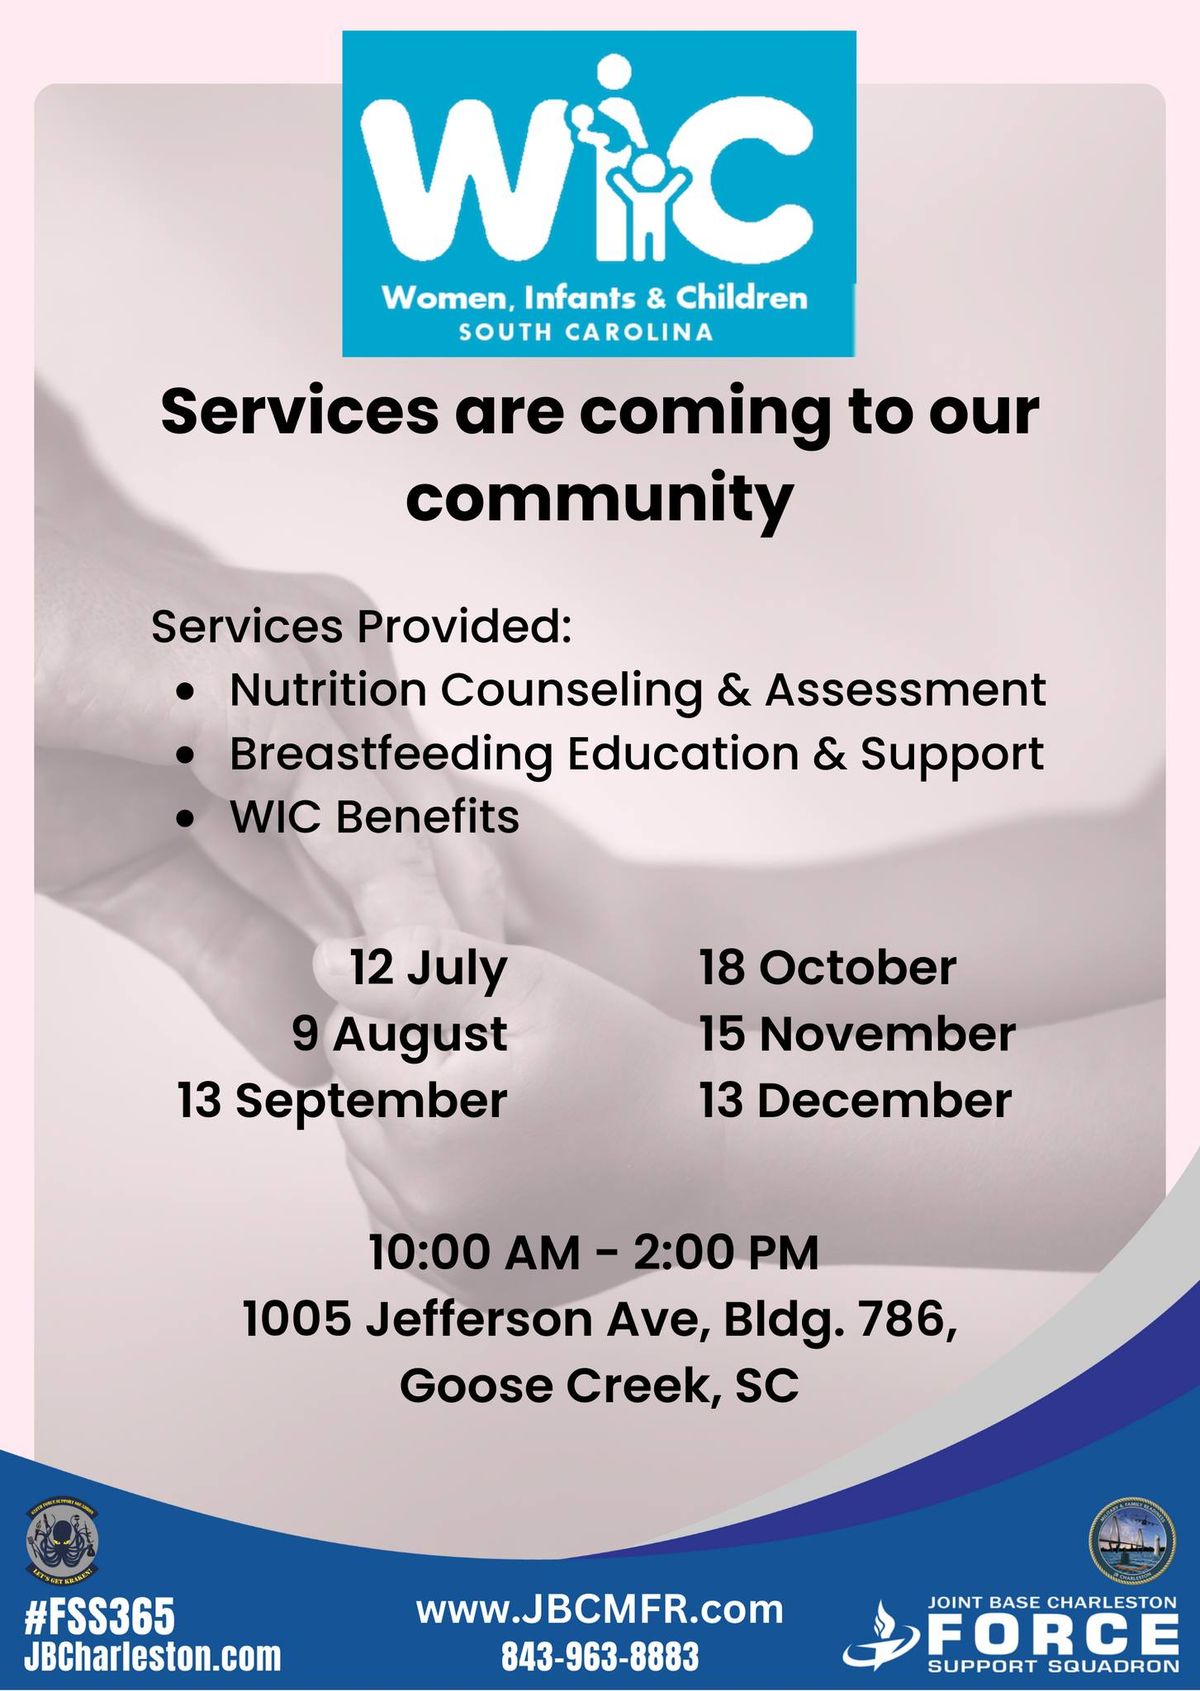 WIC Services On-Site